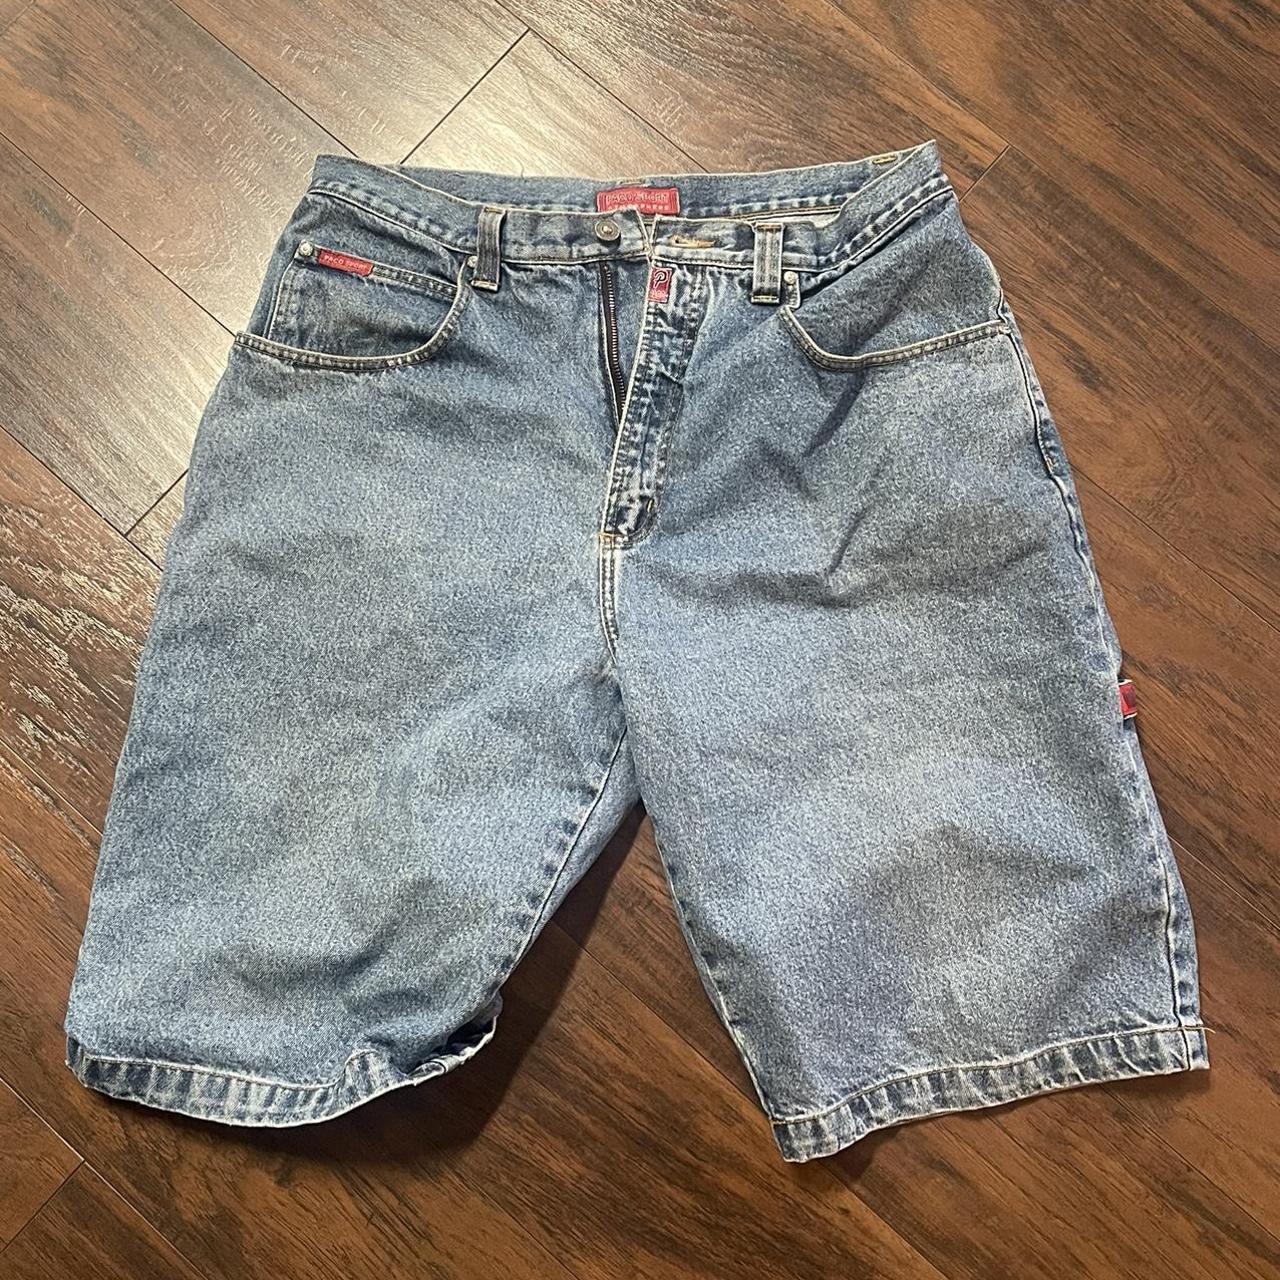 Vintage Paco jorts -Clean and sanitized 🧼🫧 - Only... - Depop